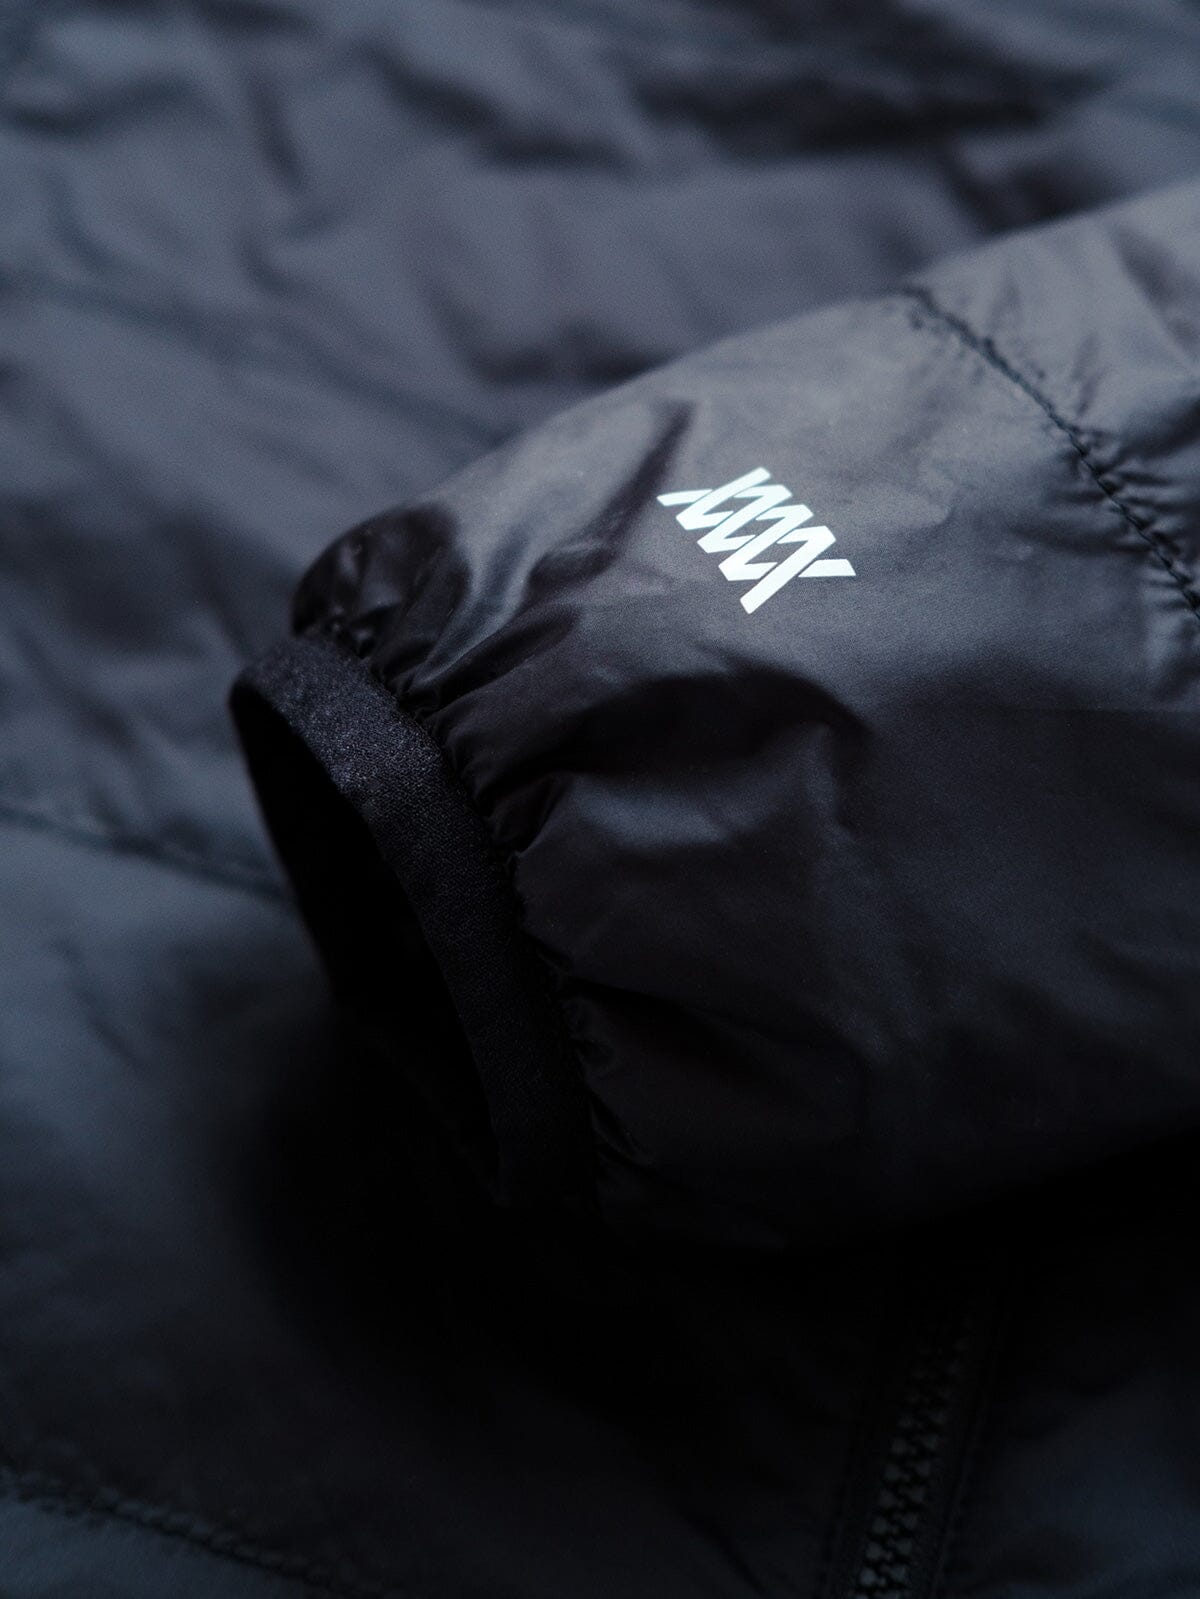 Onyx by Mission Workshop - Weatherproof Bags & Technical Apparel - San Francisco & Los Angeles - Built to endure - Guaranteed forever